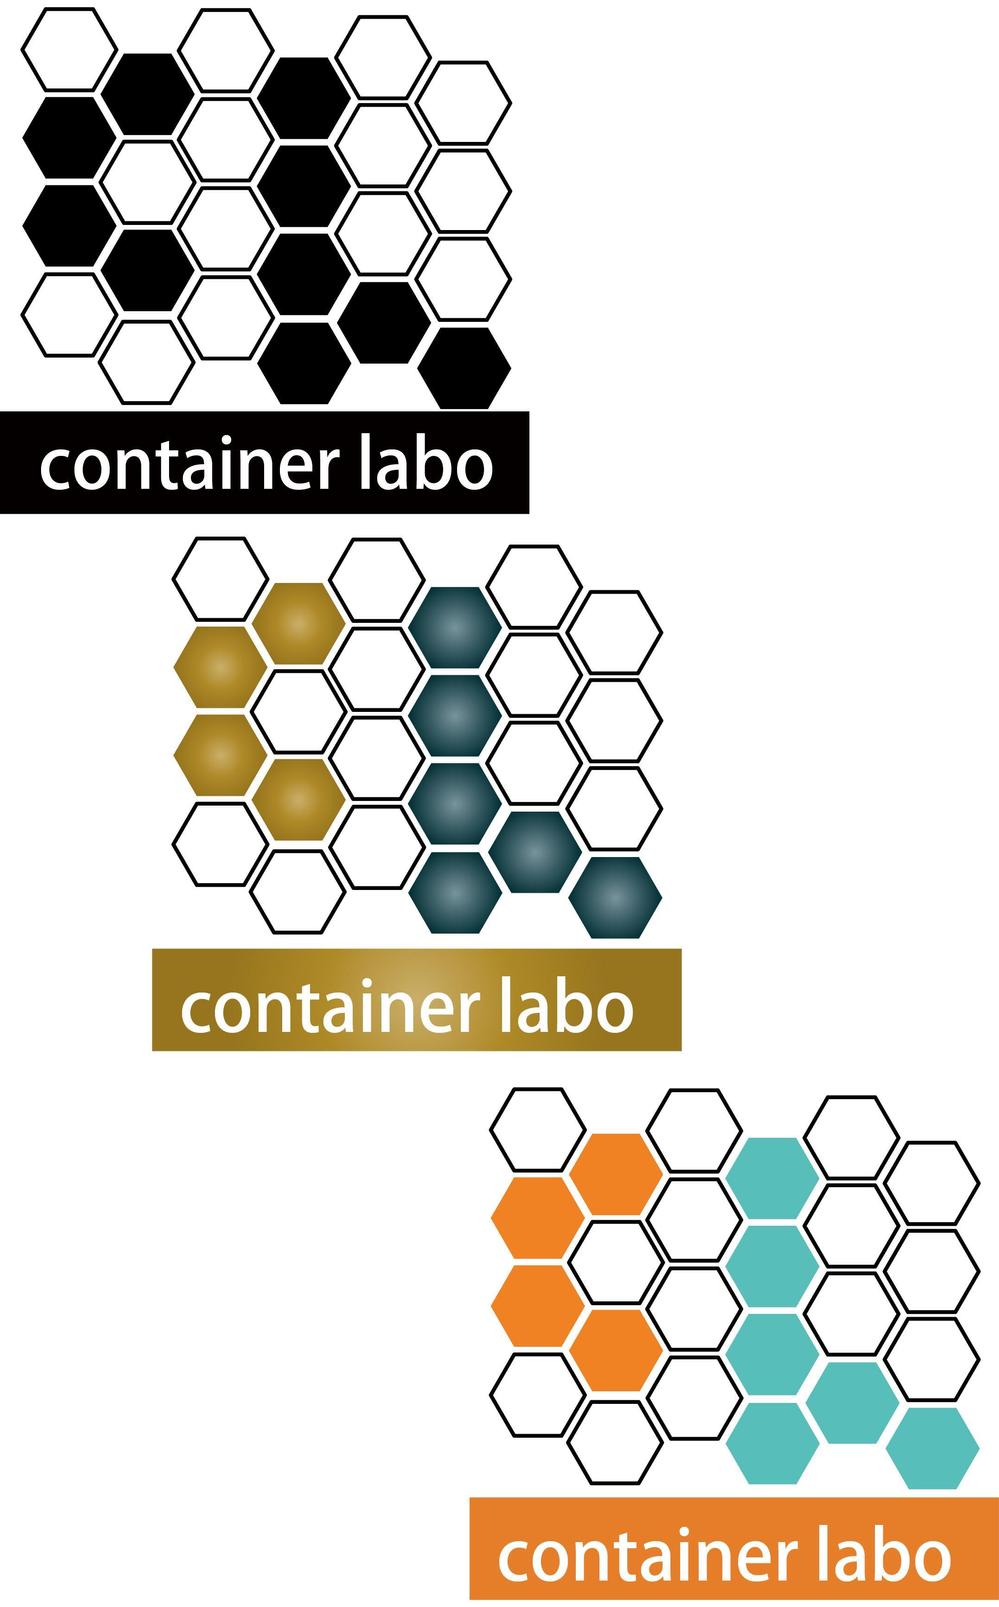 Container_Labo.jpg